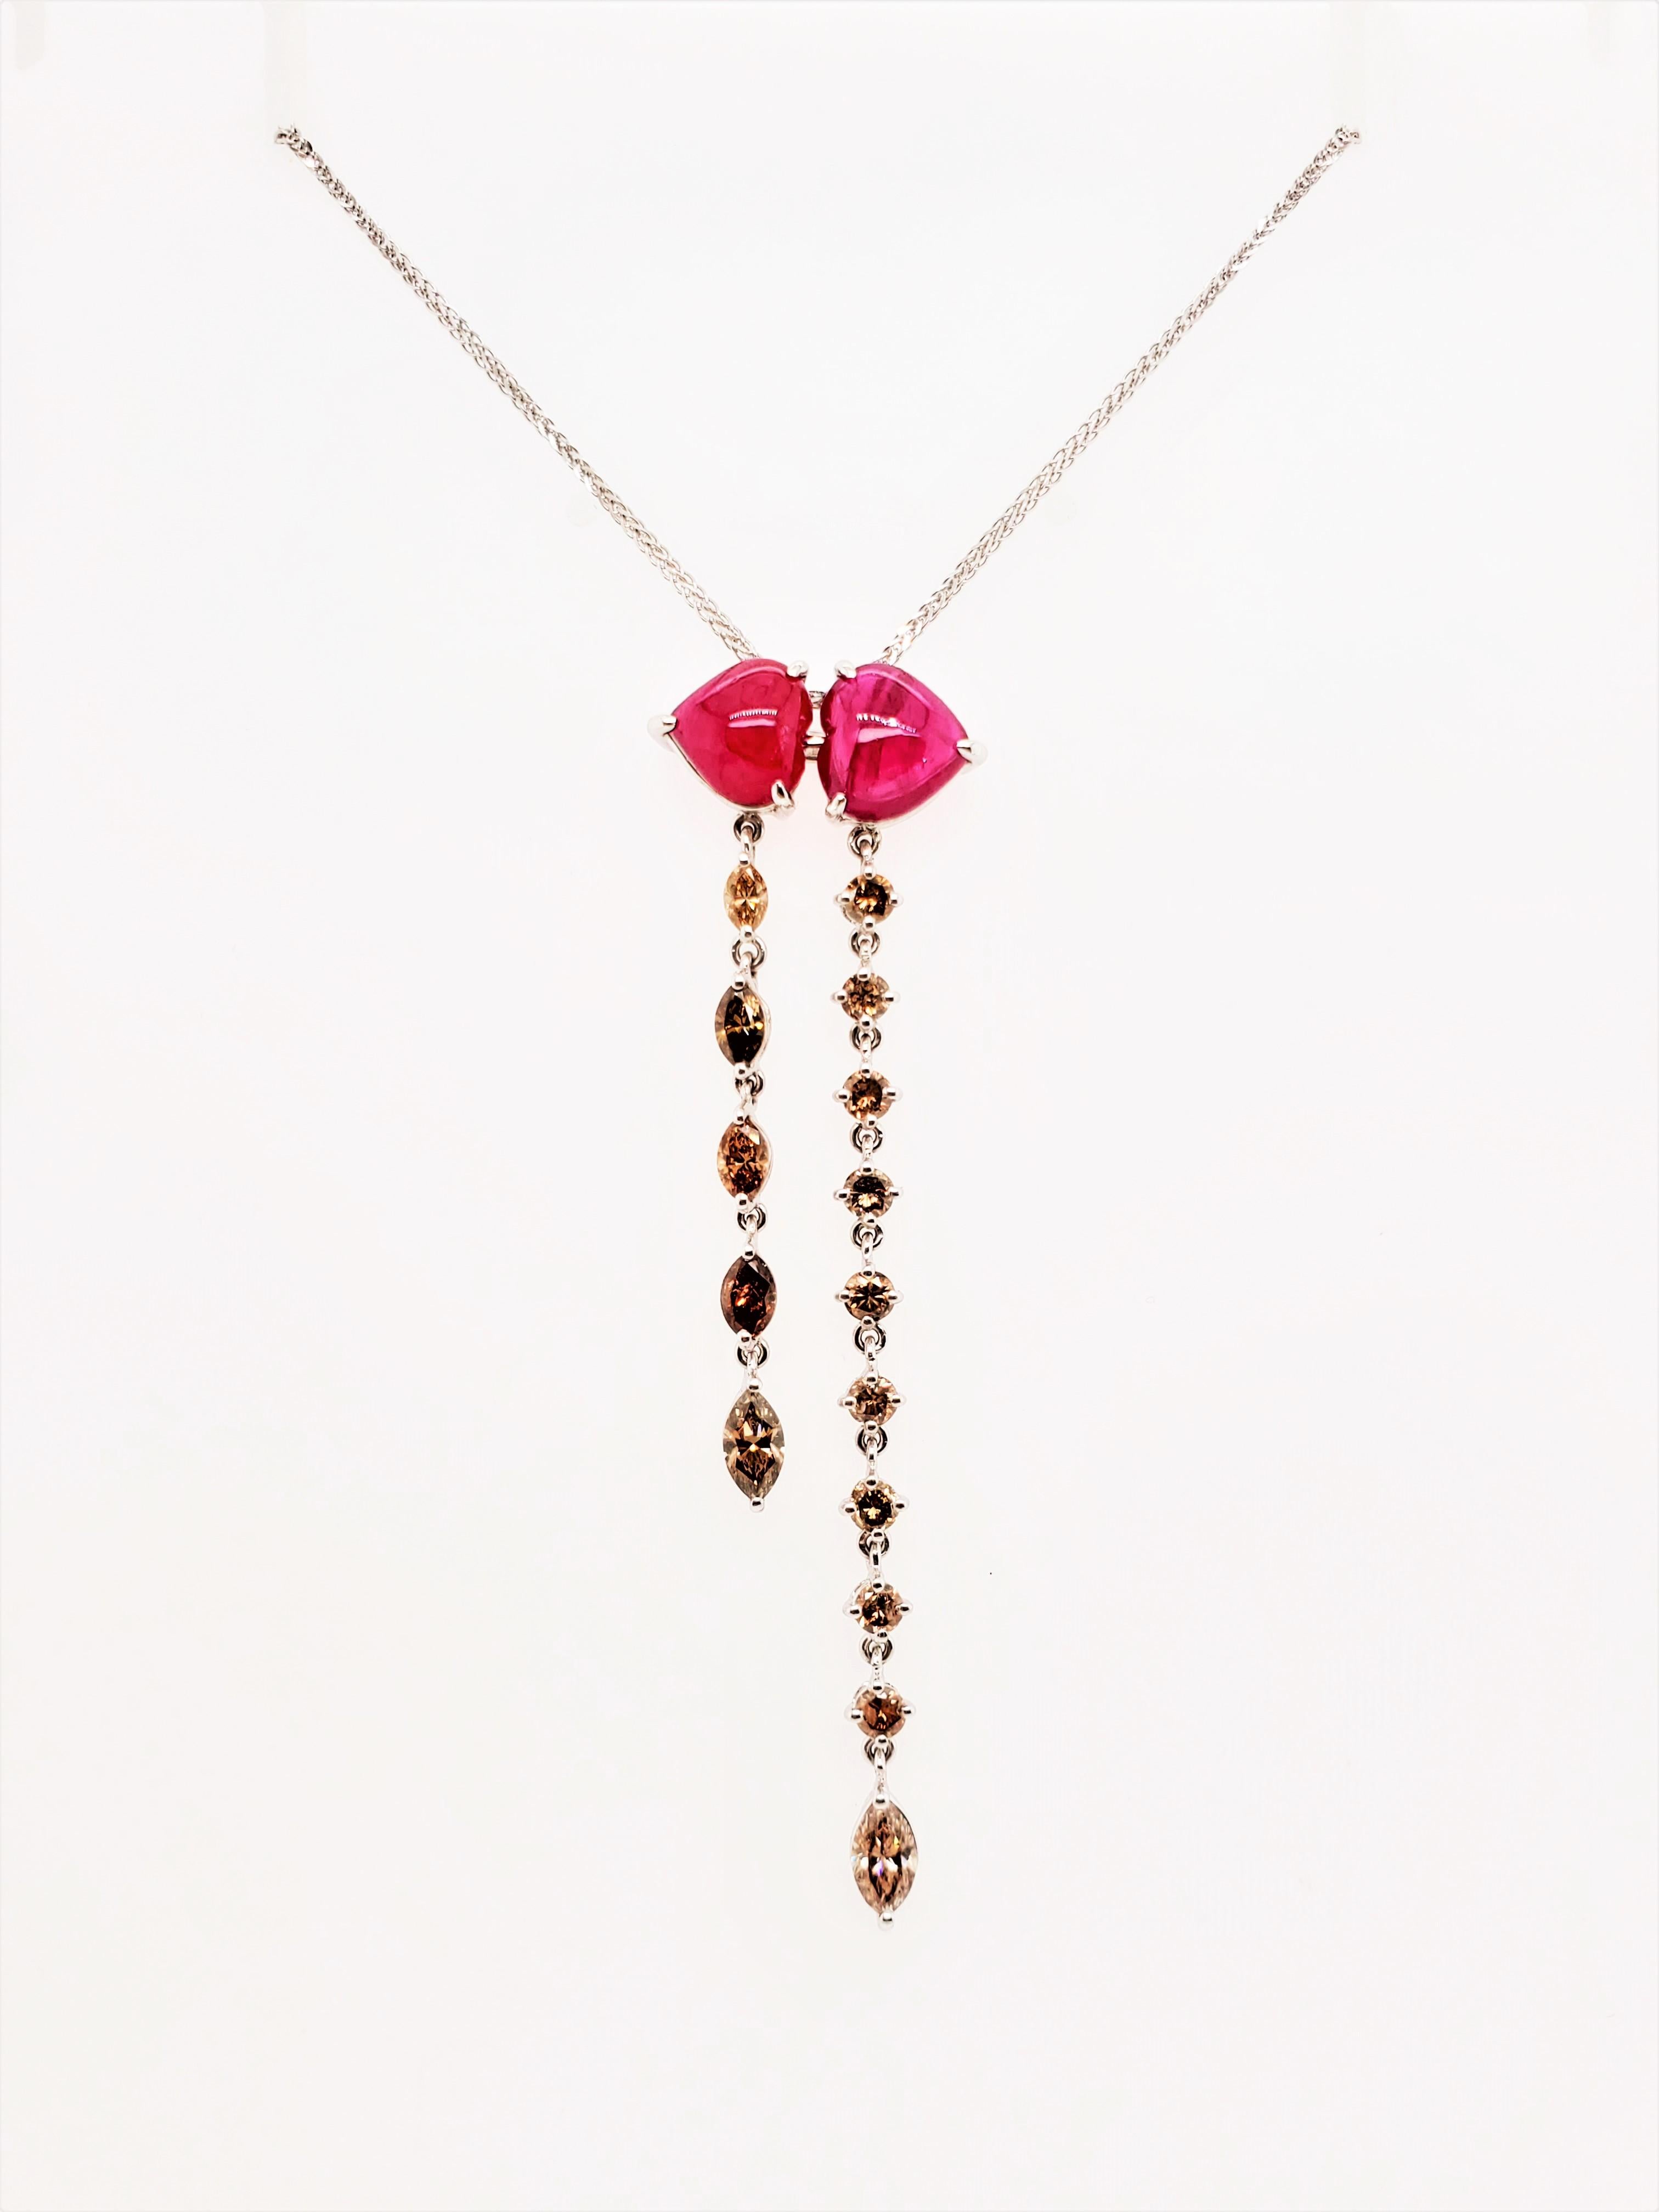 3.79 Carat Ruby Cabochon And Brown Diamond White Gold Pendant With Gold Chain:

A magnificent pendant necklace comprised of two luscious red heart-shaped cabochon rubies weighing 3.79 carat, with flowing brown diamond lines weighing 1.81 carat. The